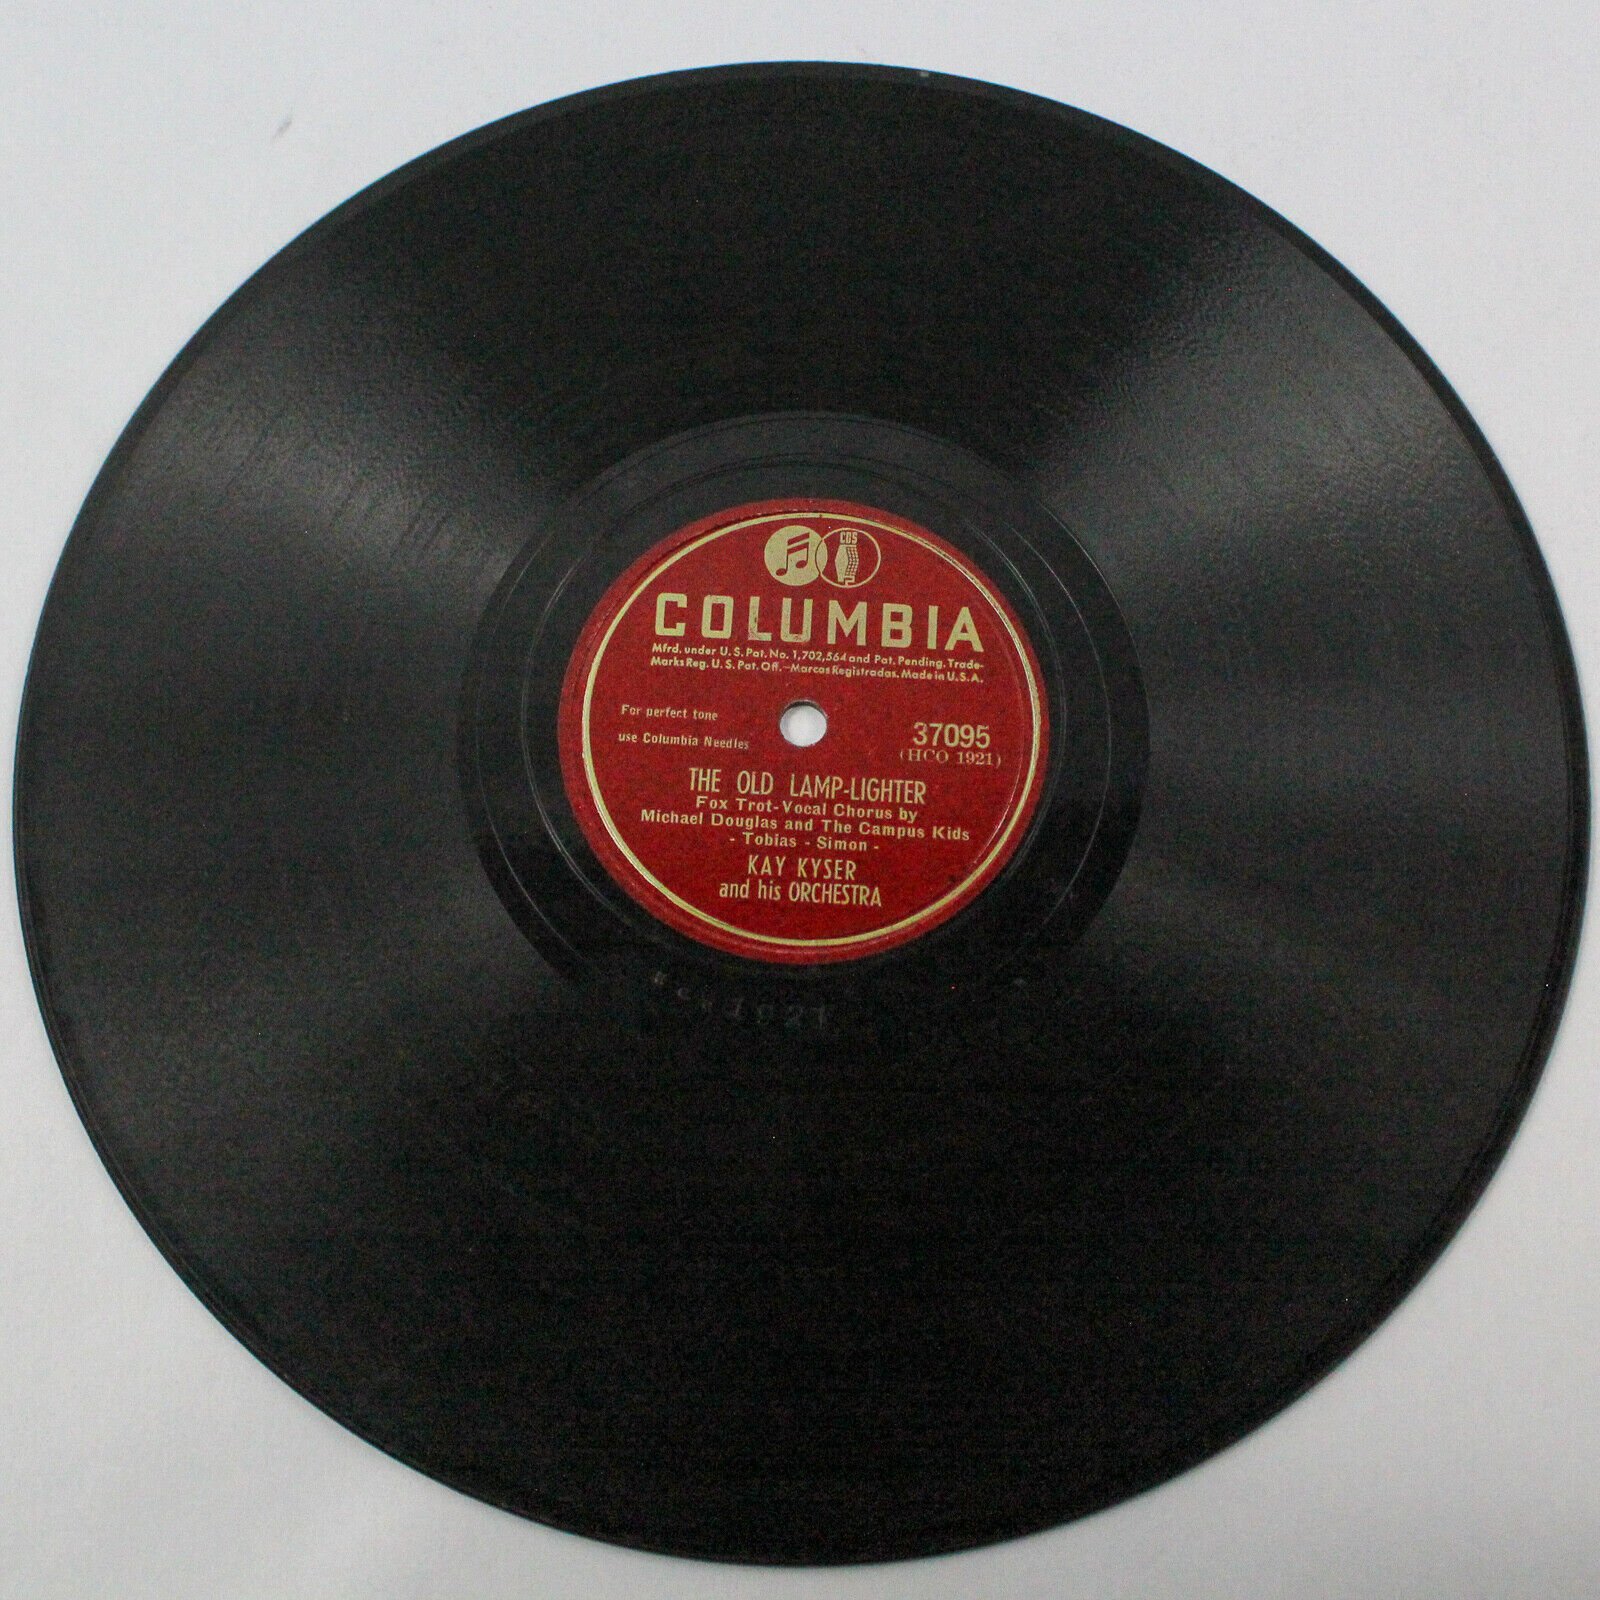 Vintage Kay Kyser And His Orchestra Vinyl 78 RPM Columbia Sold As Is 1946